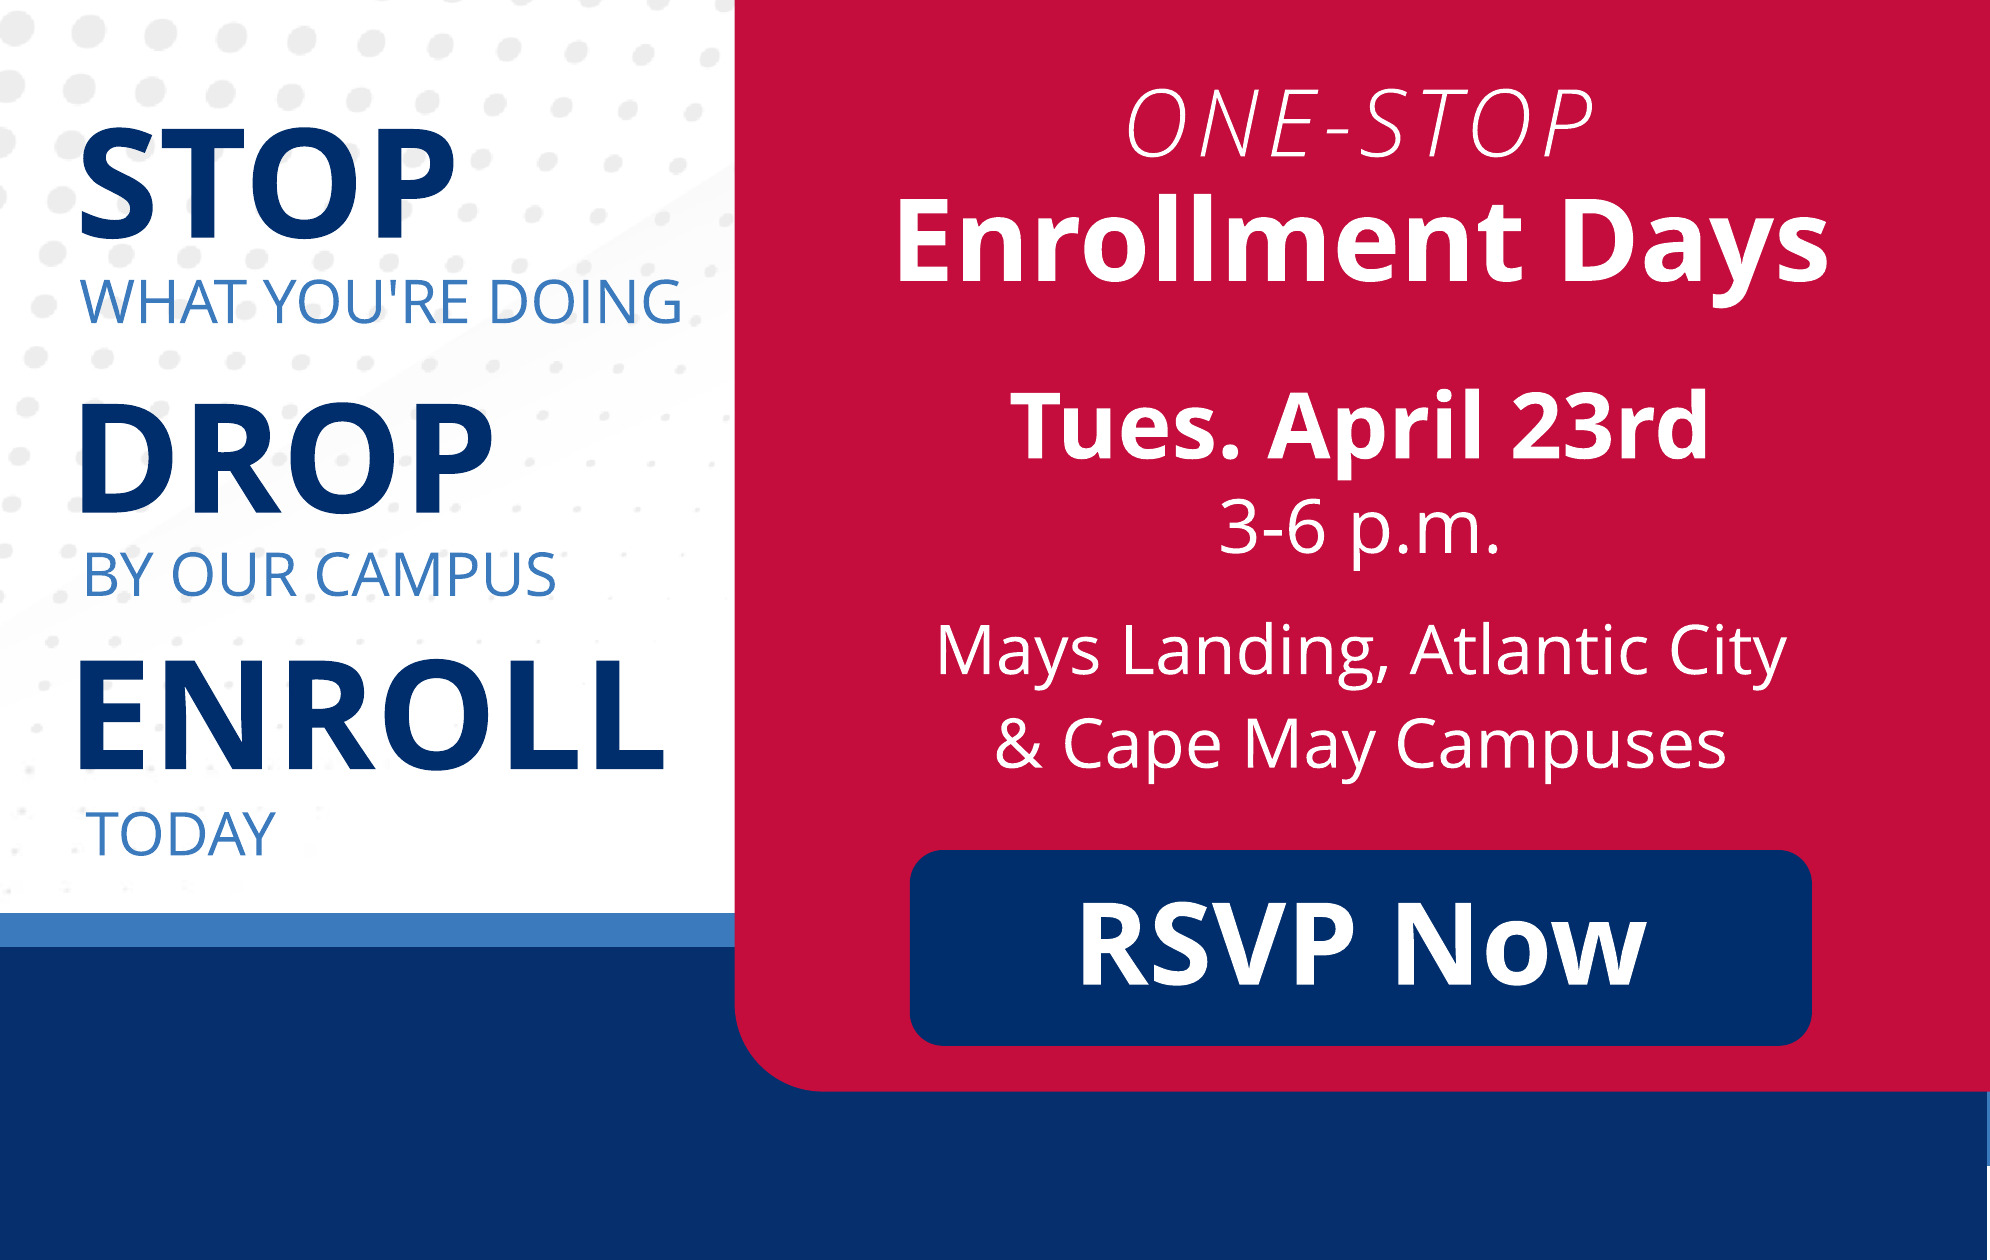 Stop, Drop and Enroll is on April 23 on all campuses.